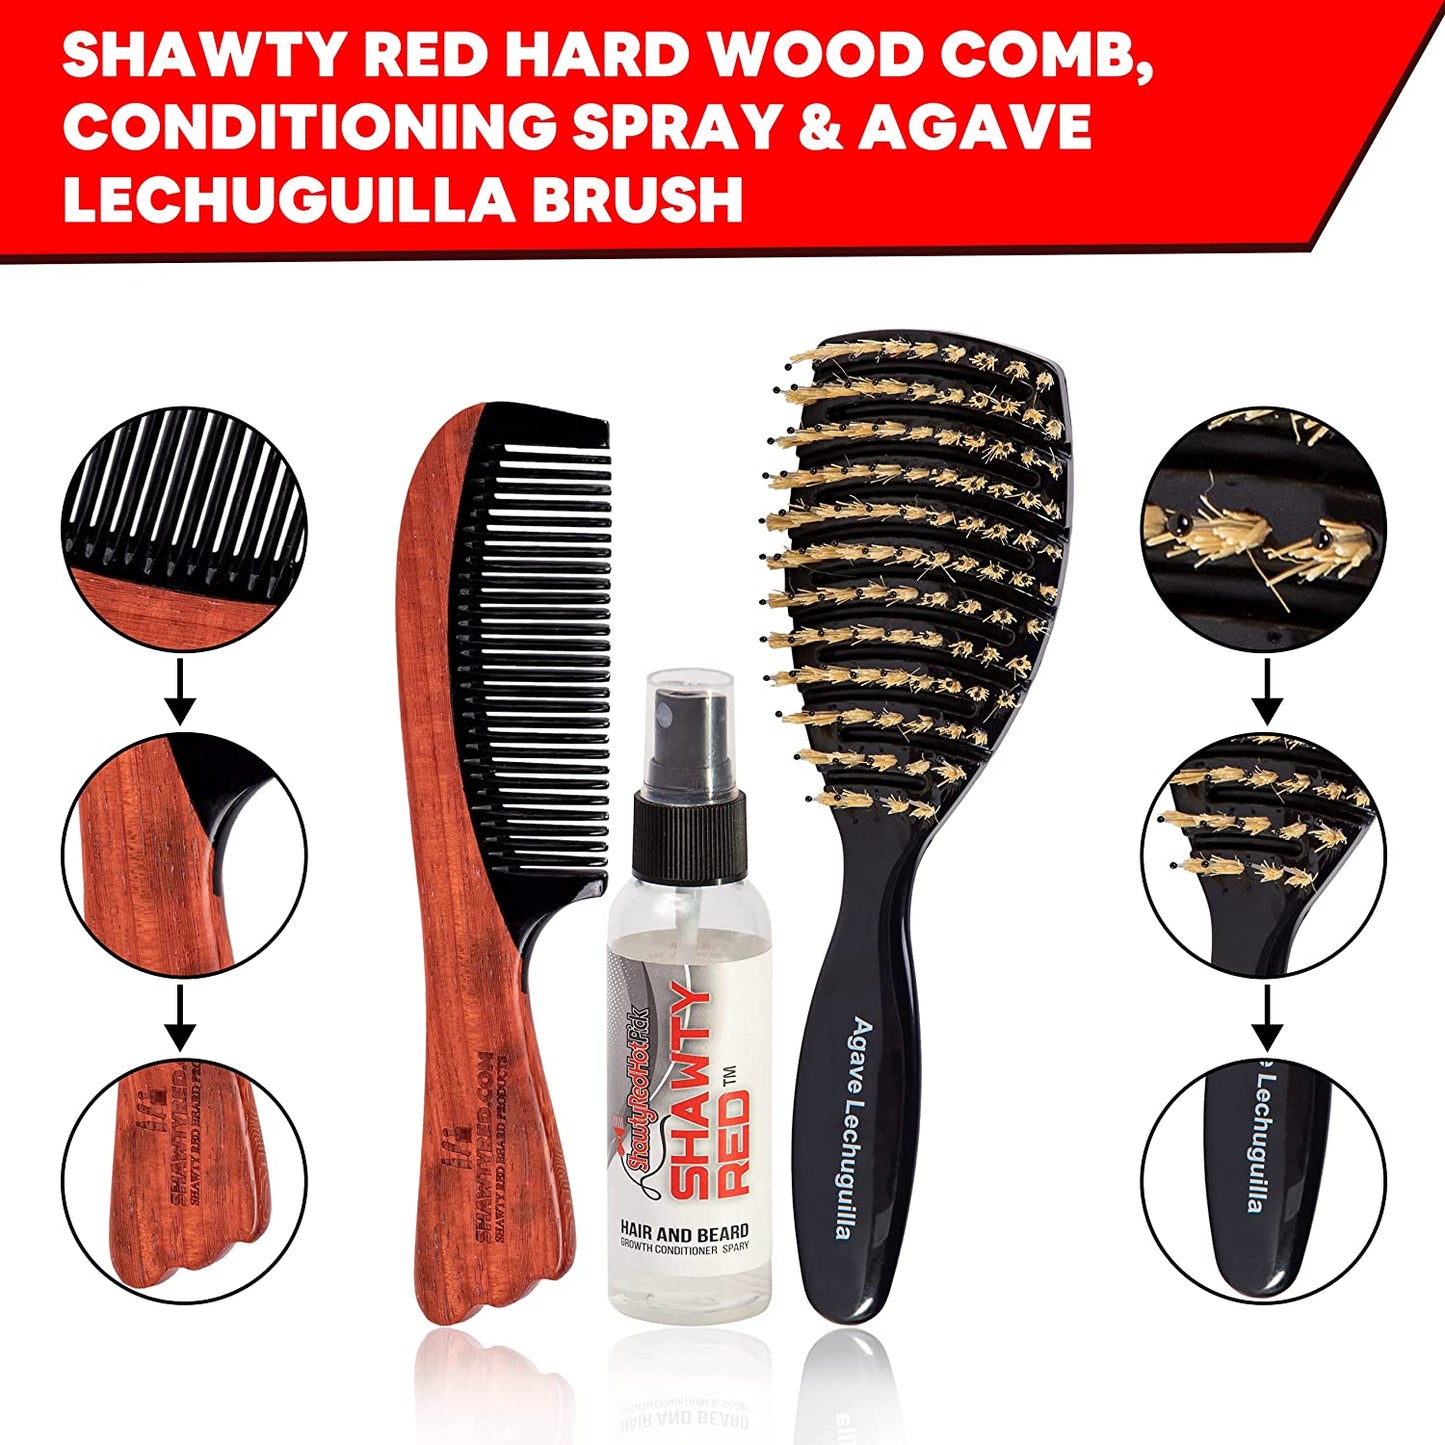 The KoSher Agave Lechuguilla Hairbrush W/ Wood Comb & Hair Conditioning Spray